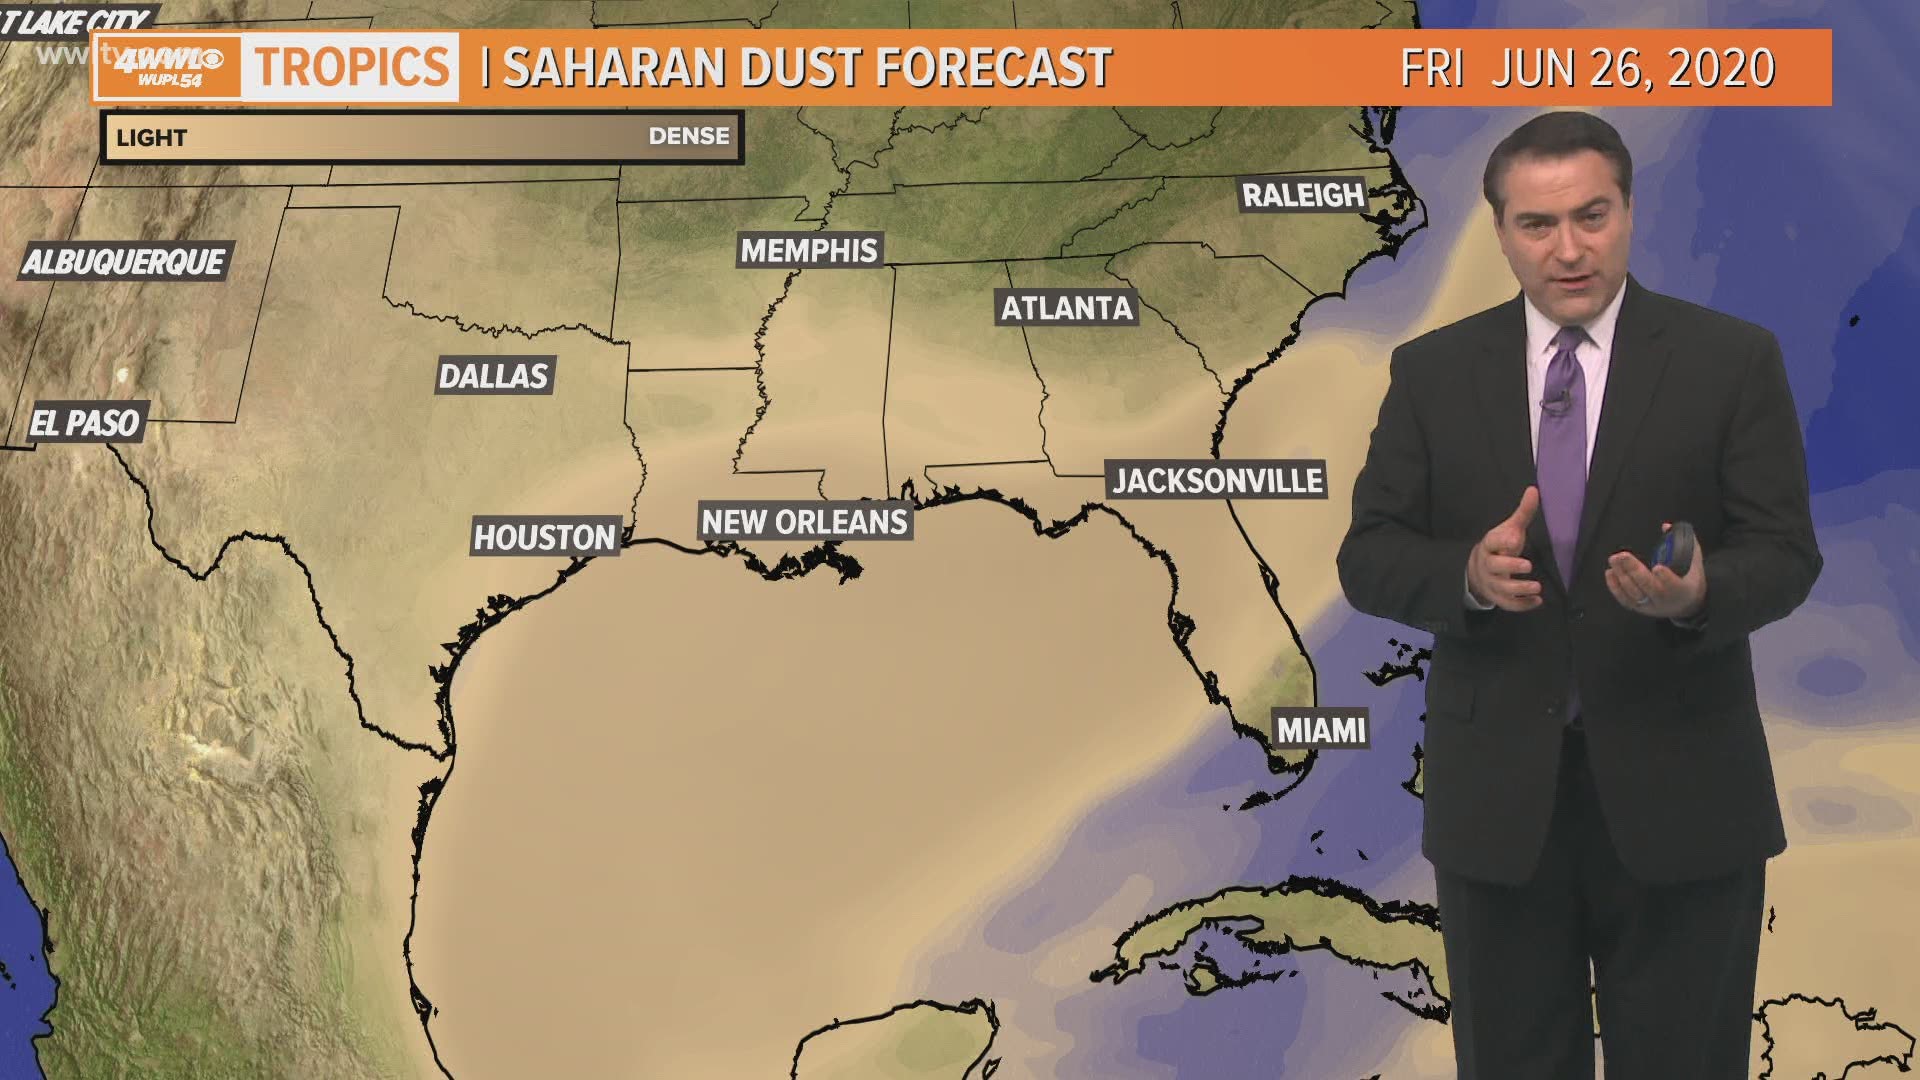 The tropics remain quiet as Saharan dust moves into the Atlantic Ocean. It will arrive in New Orleans next week and that will keep the tropics quiet next week too.